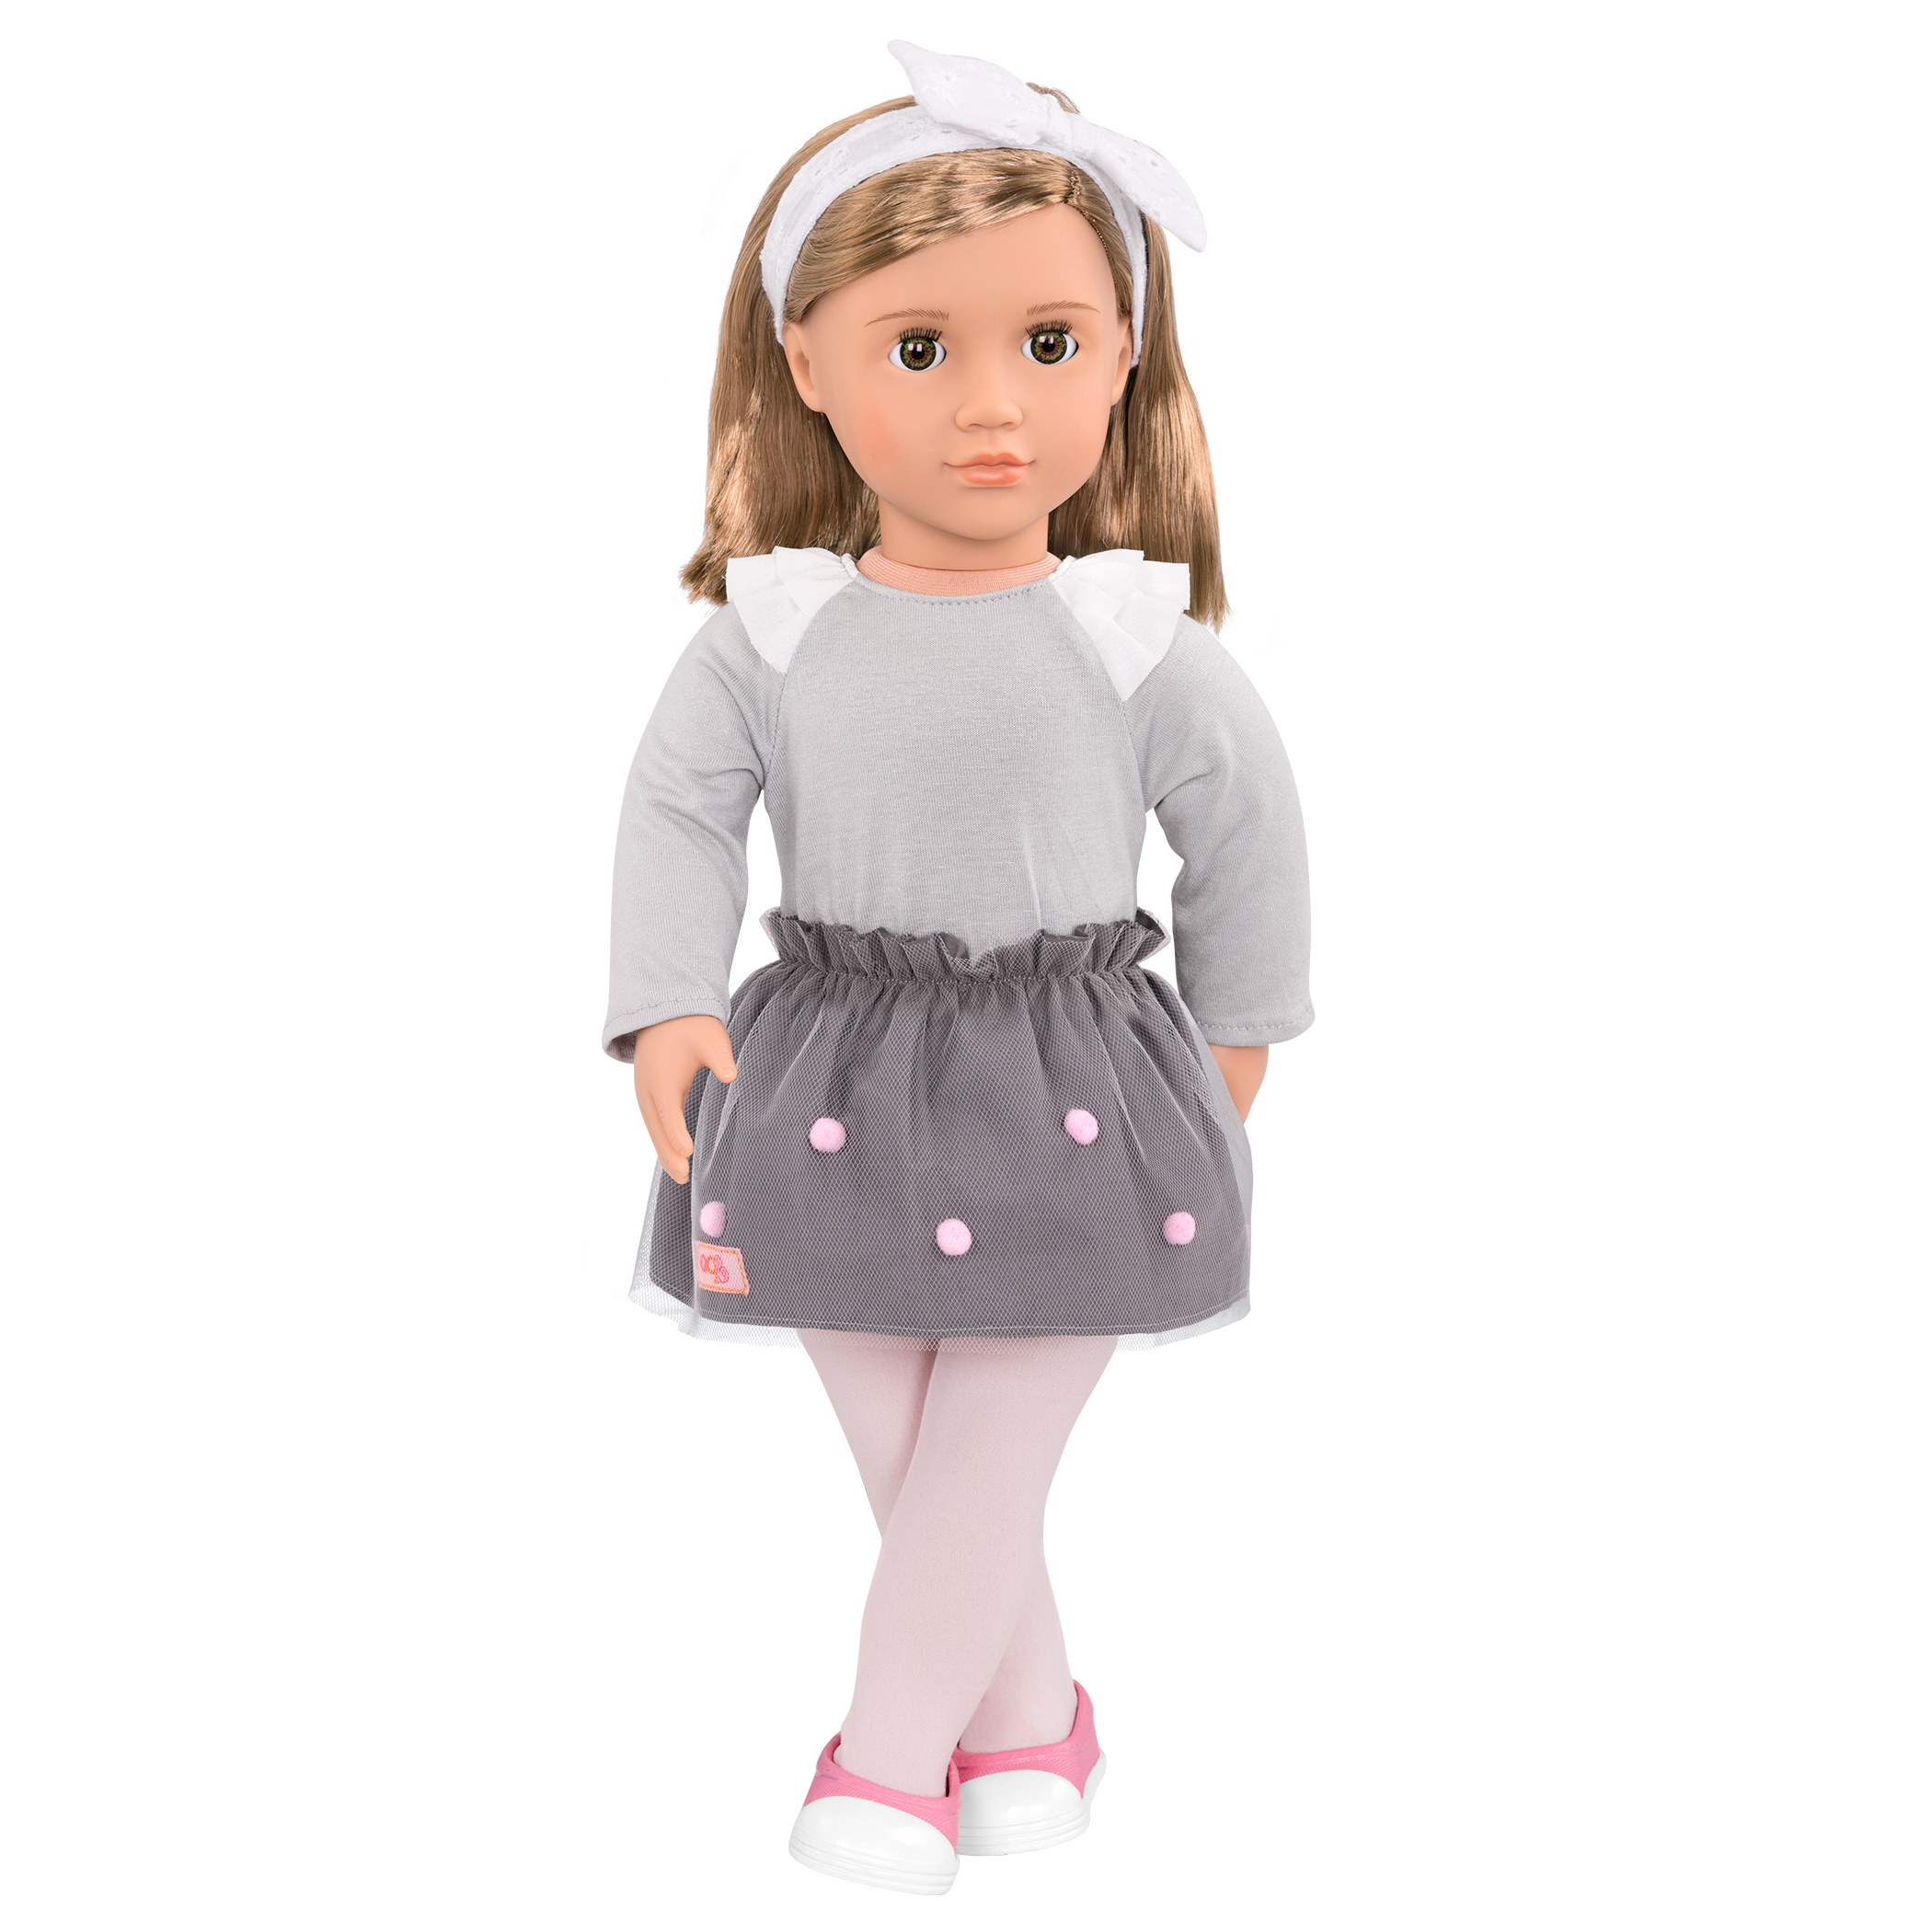 18-inch doll with light-brown hair and green eyes